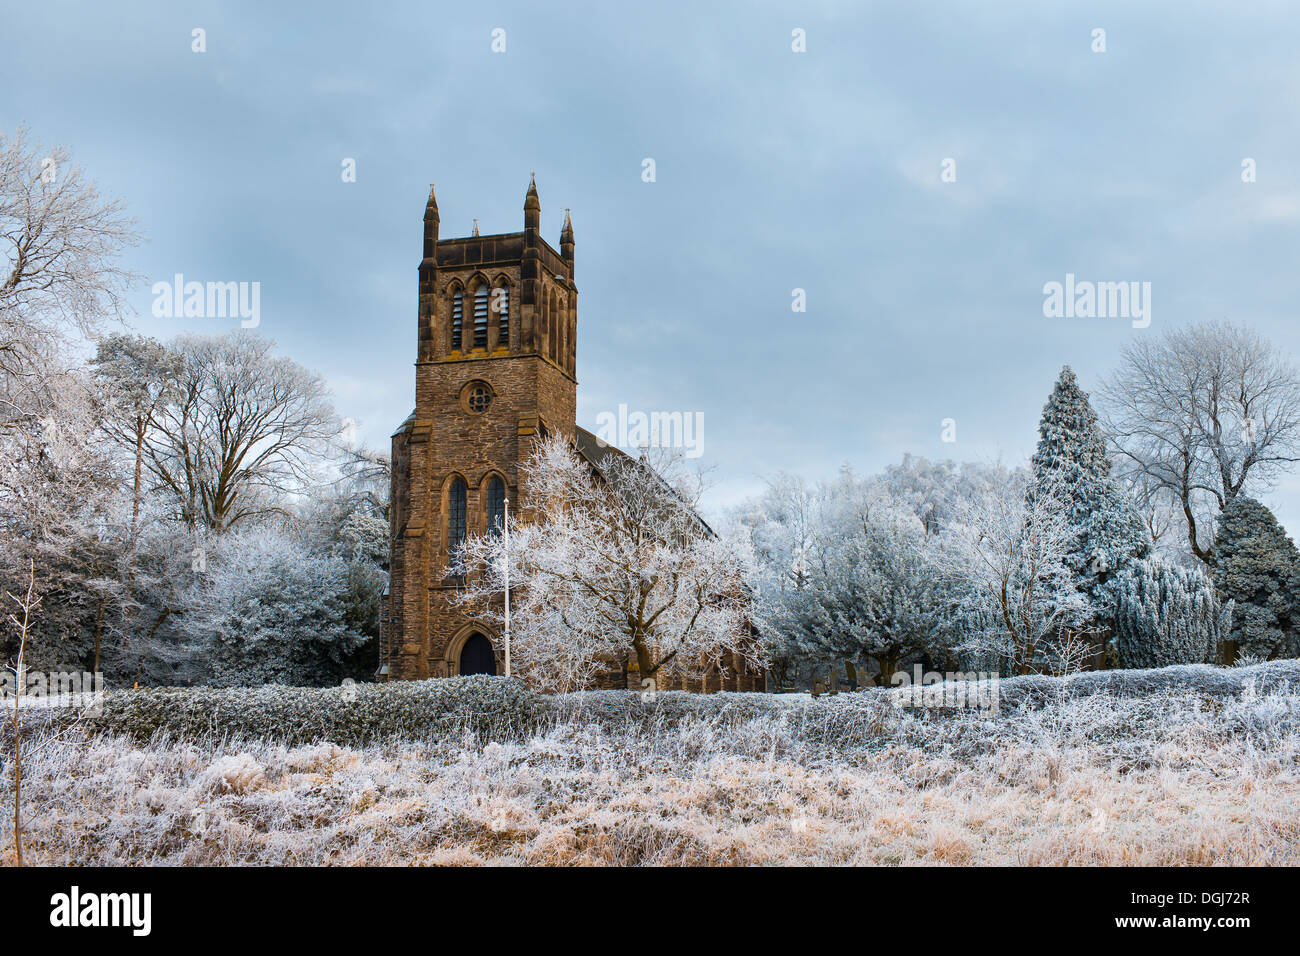 The church of St. Peter at Copt Oak surrounded by trees covered in hoar frost. Stock Photo